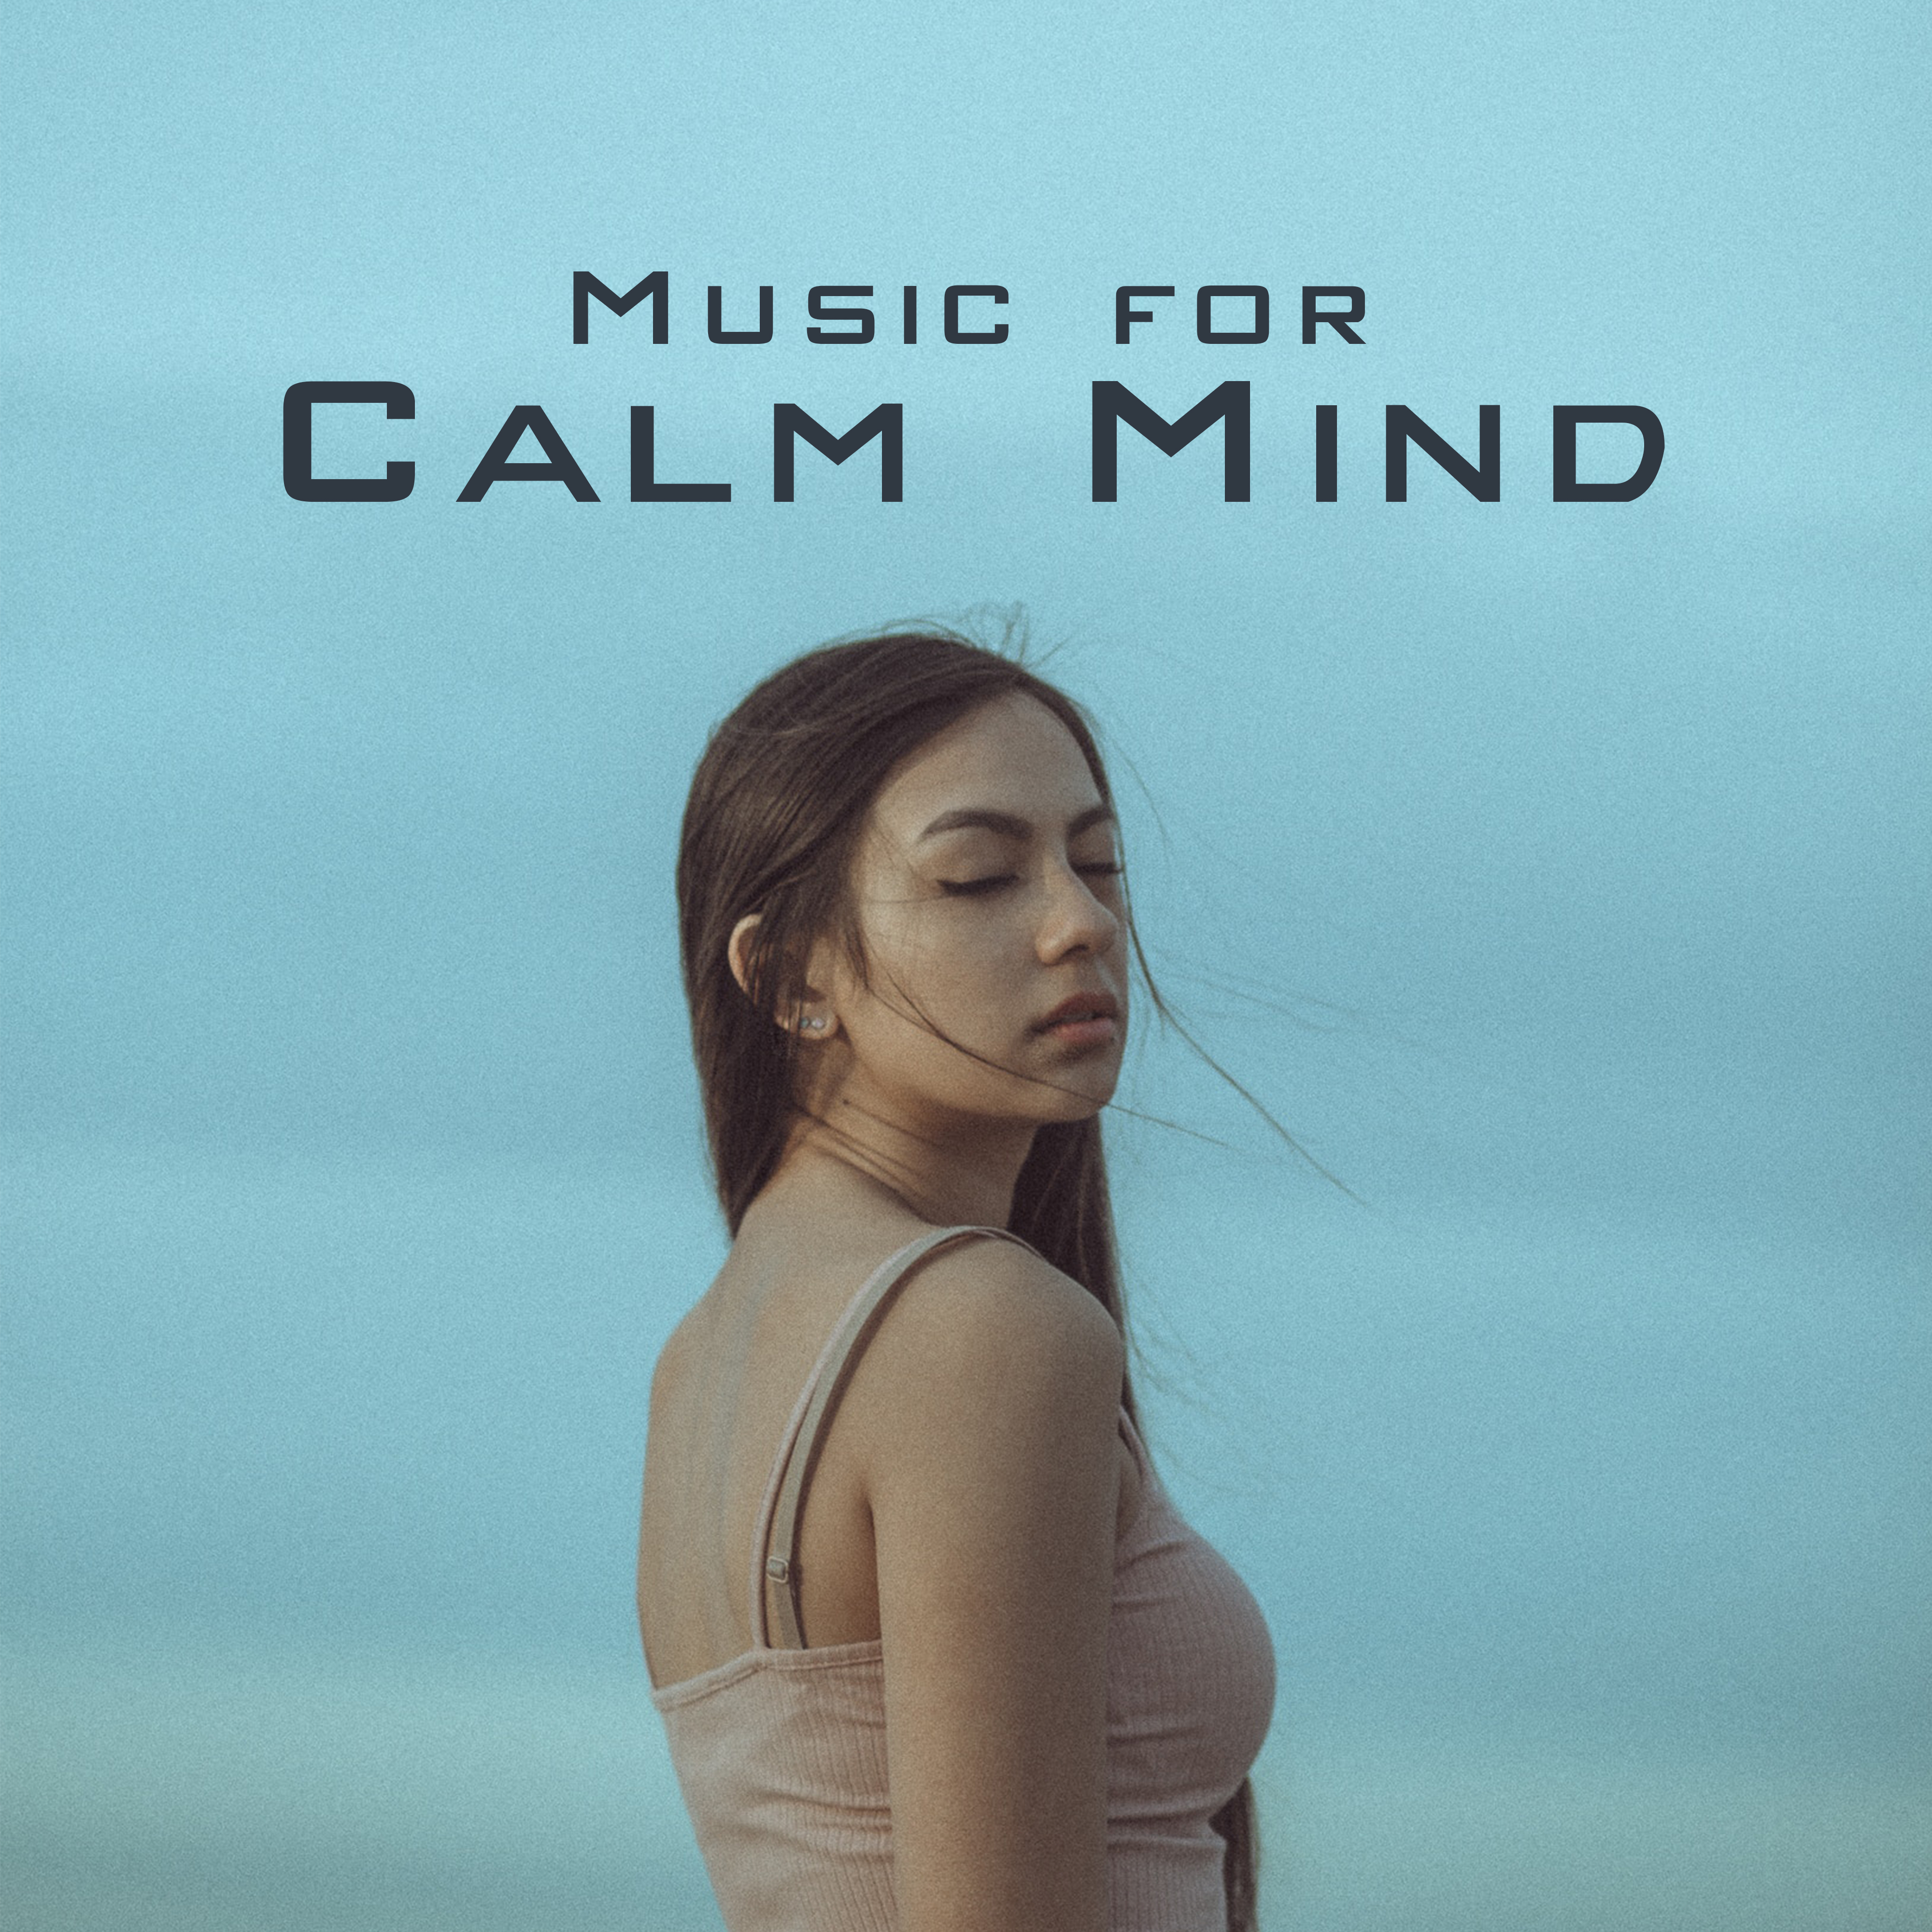 Music for Calm Mind